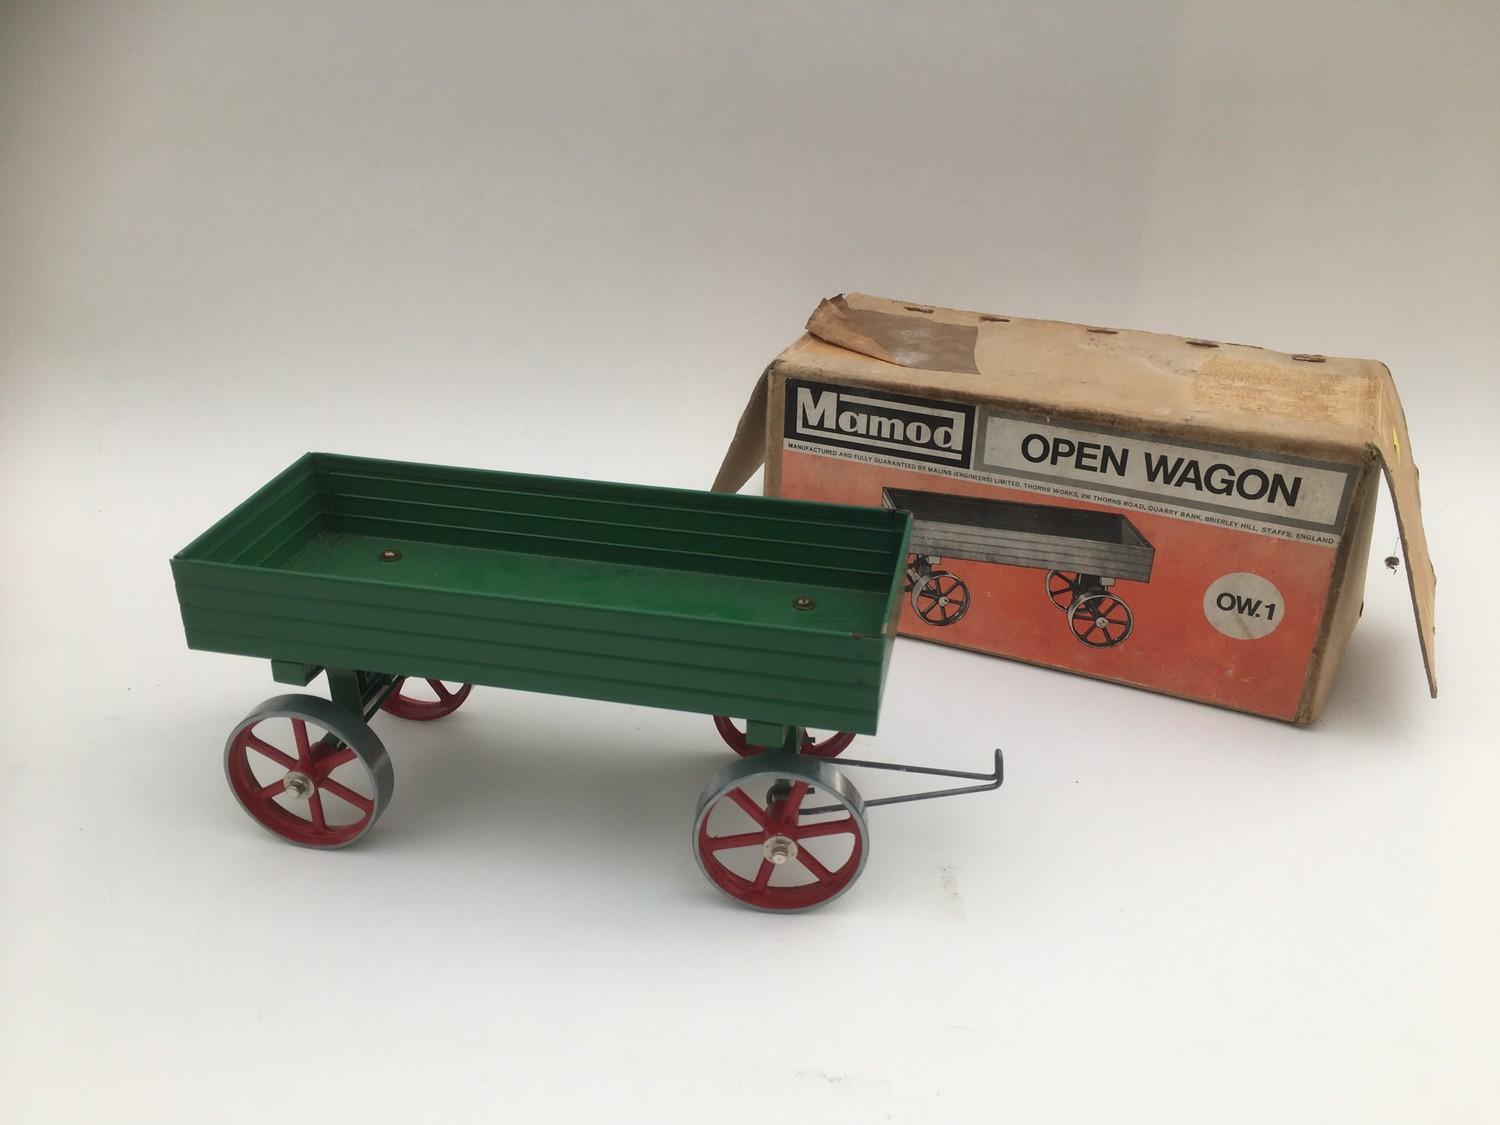 A Mamod steam engine, without its box and two Mamod trailers, an Open Wagon and a logging wagon, - Image 4 of 5